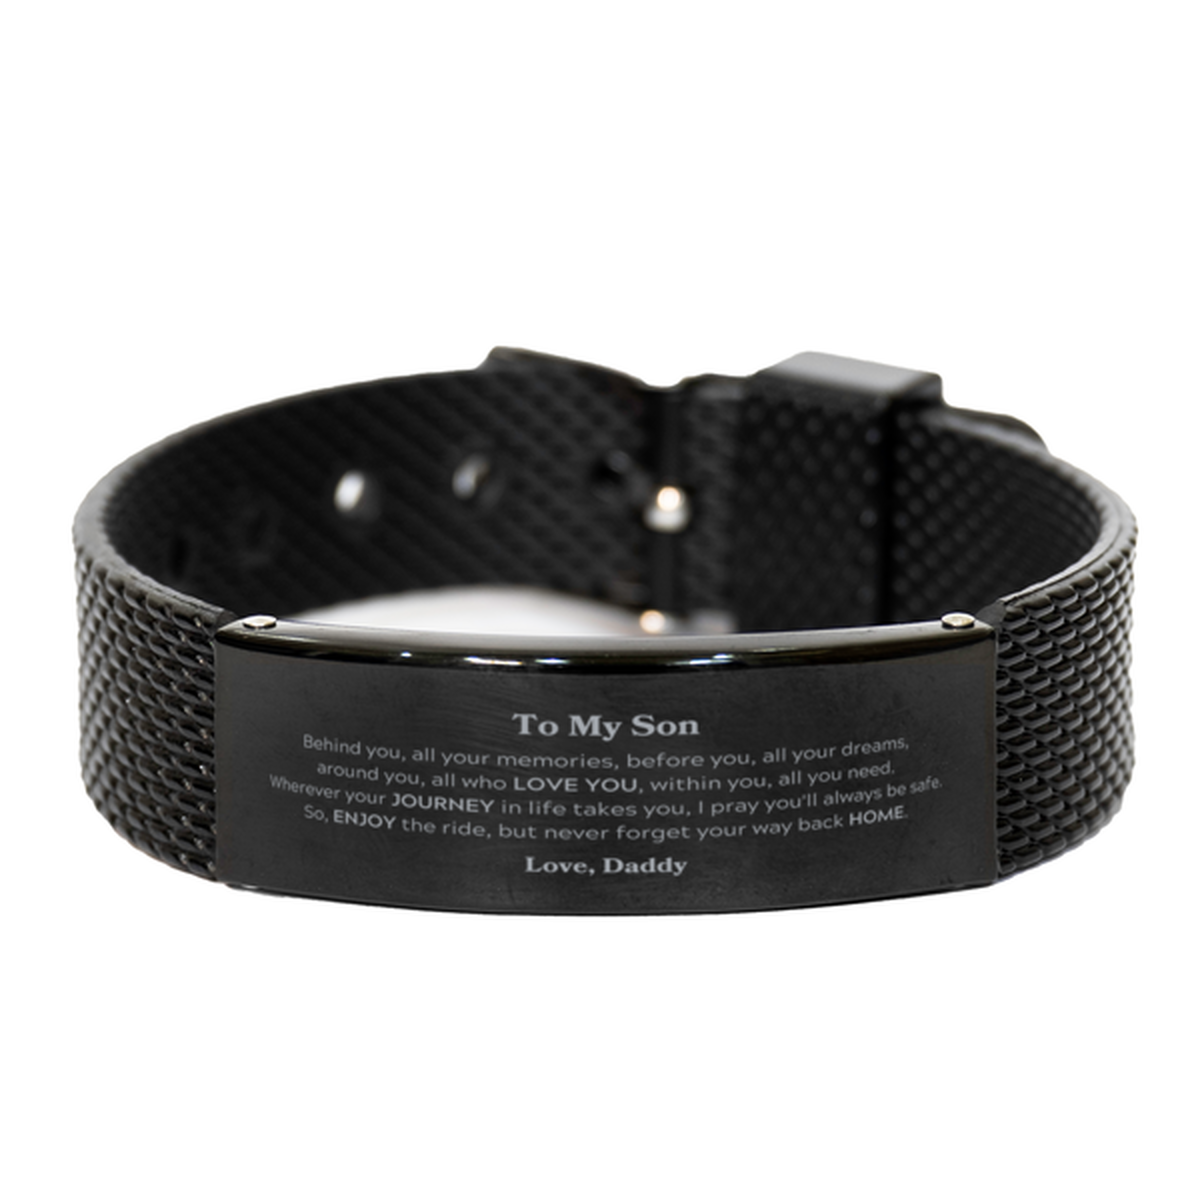 To My Son Graduation Gifts from Daddy, Son Black Shark Mesh Bracelet Christmas Birthday Gifts for Son Behind you, all your memories, before you, all your dreams. Love, Daddy